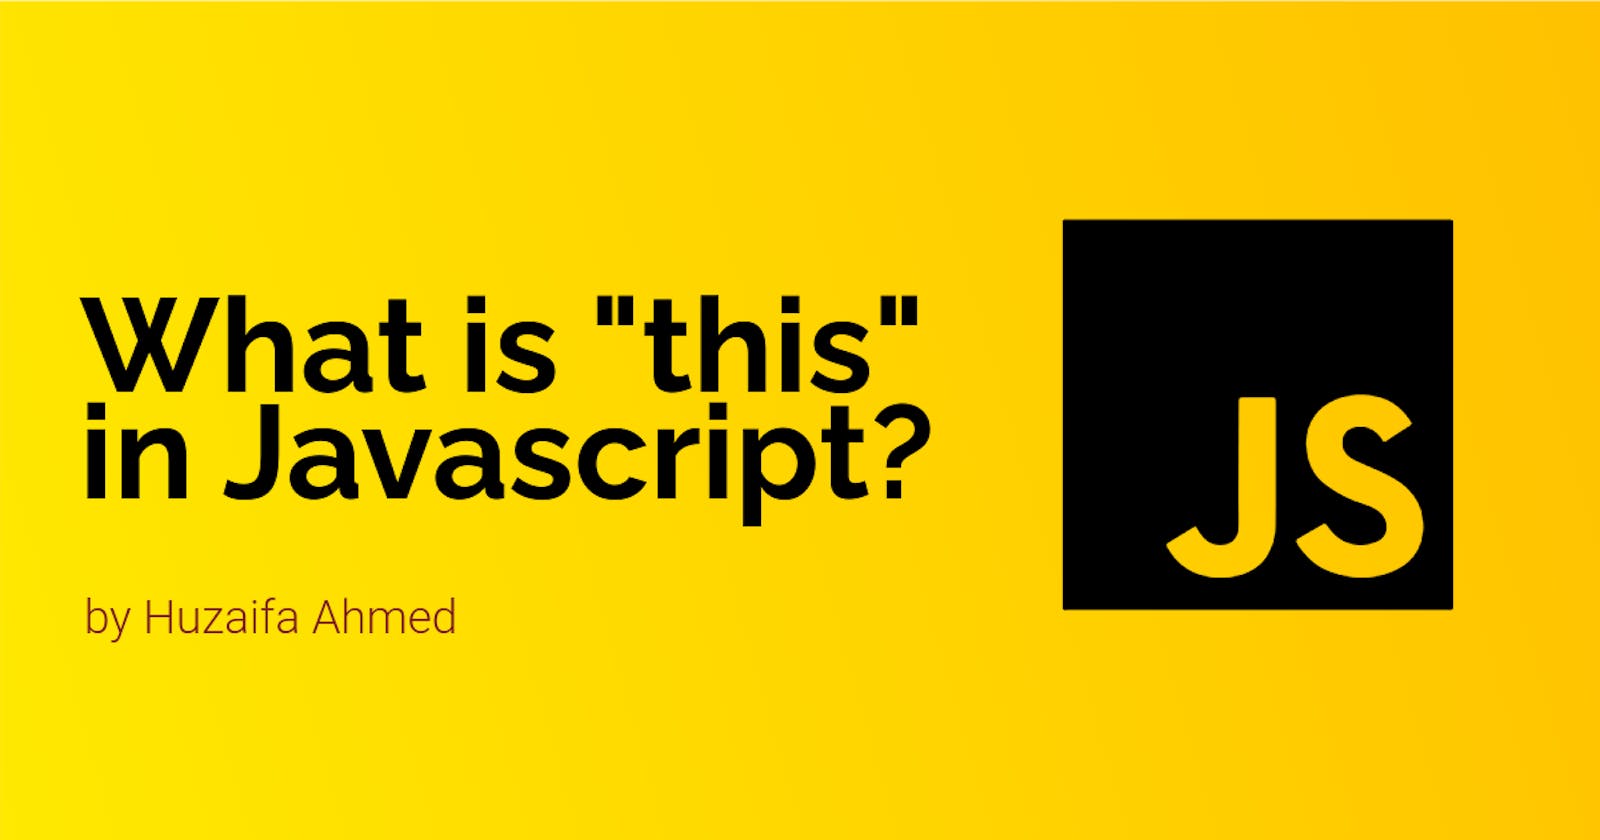 What is "this" in Javascript?